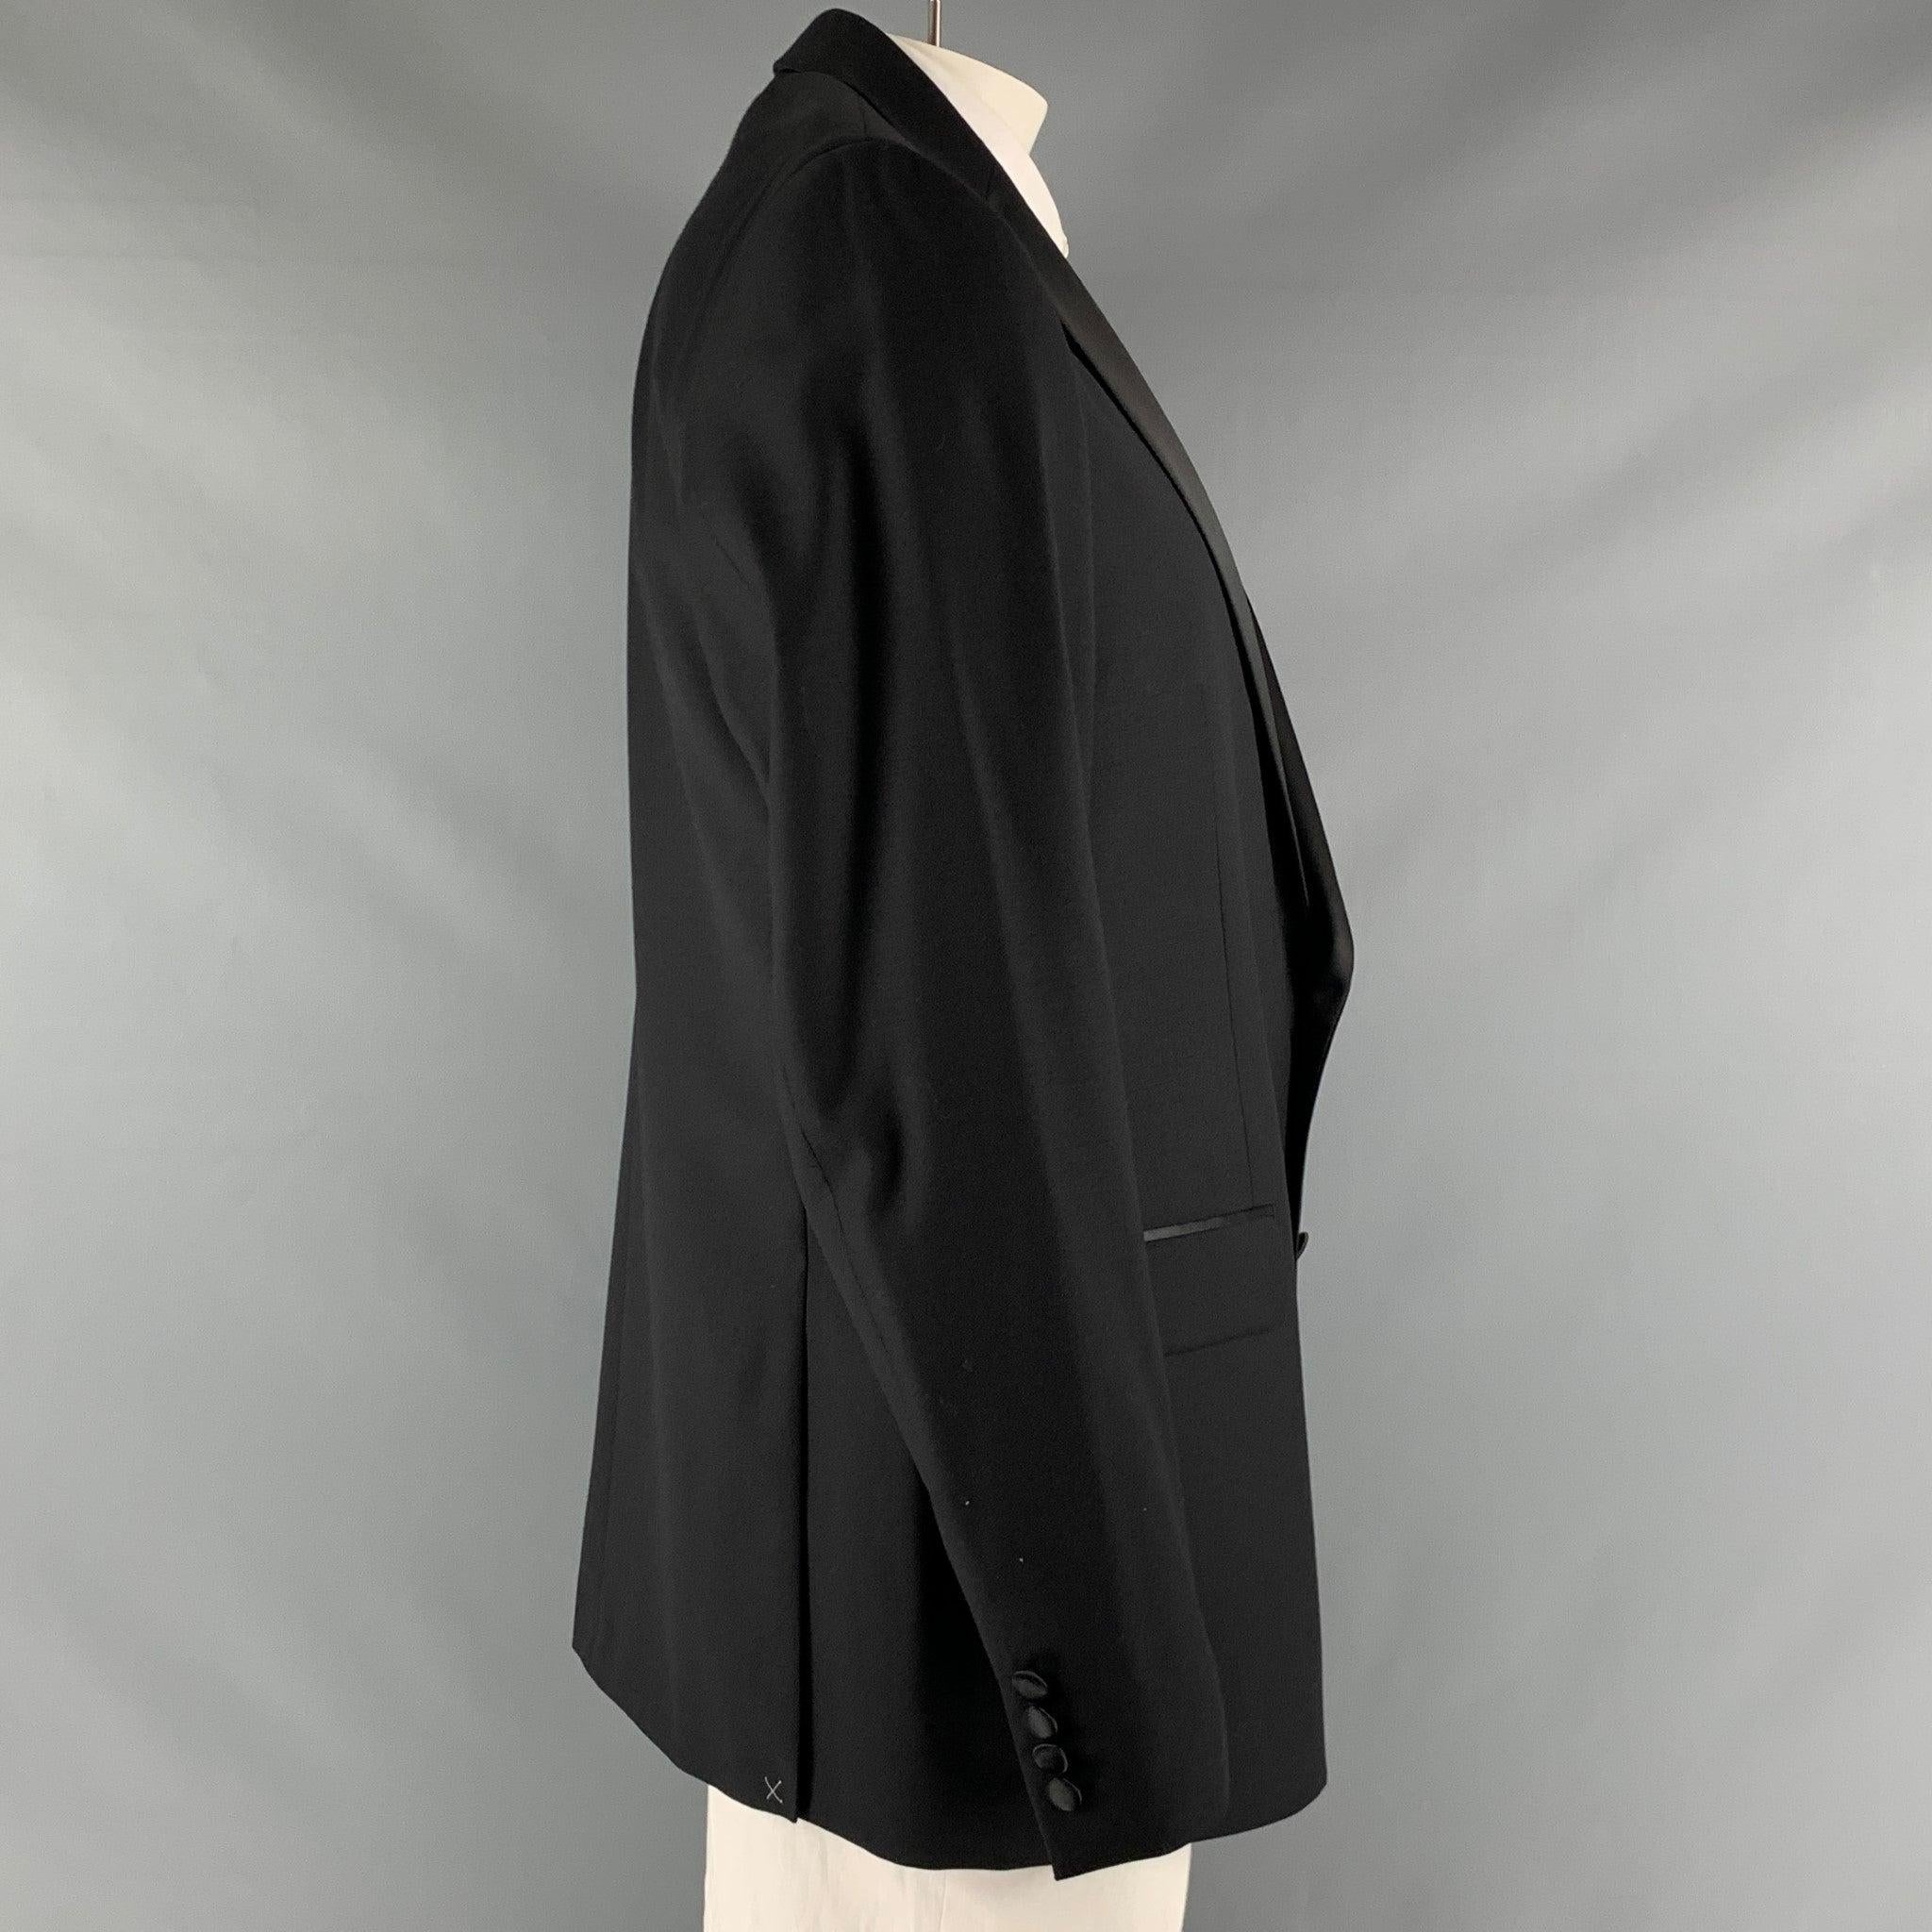 CALVIN KLEIN x SLIM FIT tuxedo sport coat comes in a black wool stretch material with a full liner and includes a single breasted, double button closure, notch lapel and double back vent.New with Tags. 

Marked:   46 L 

Measurements: 
 
Shoulder: